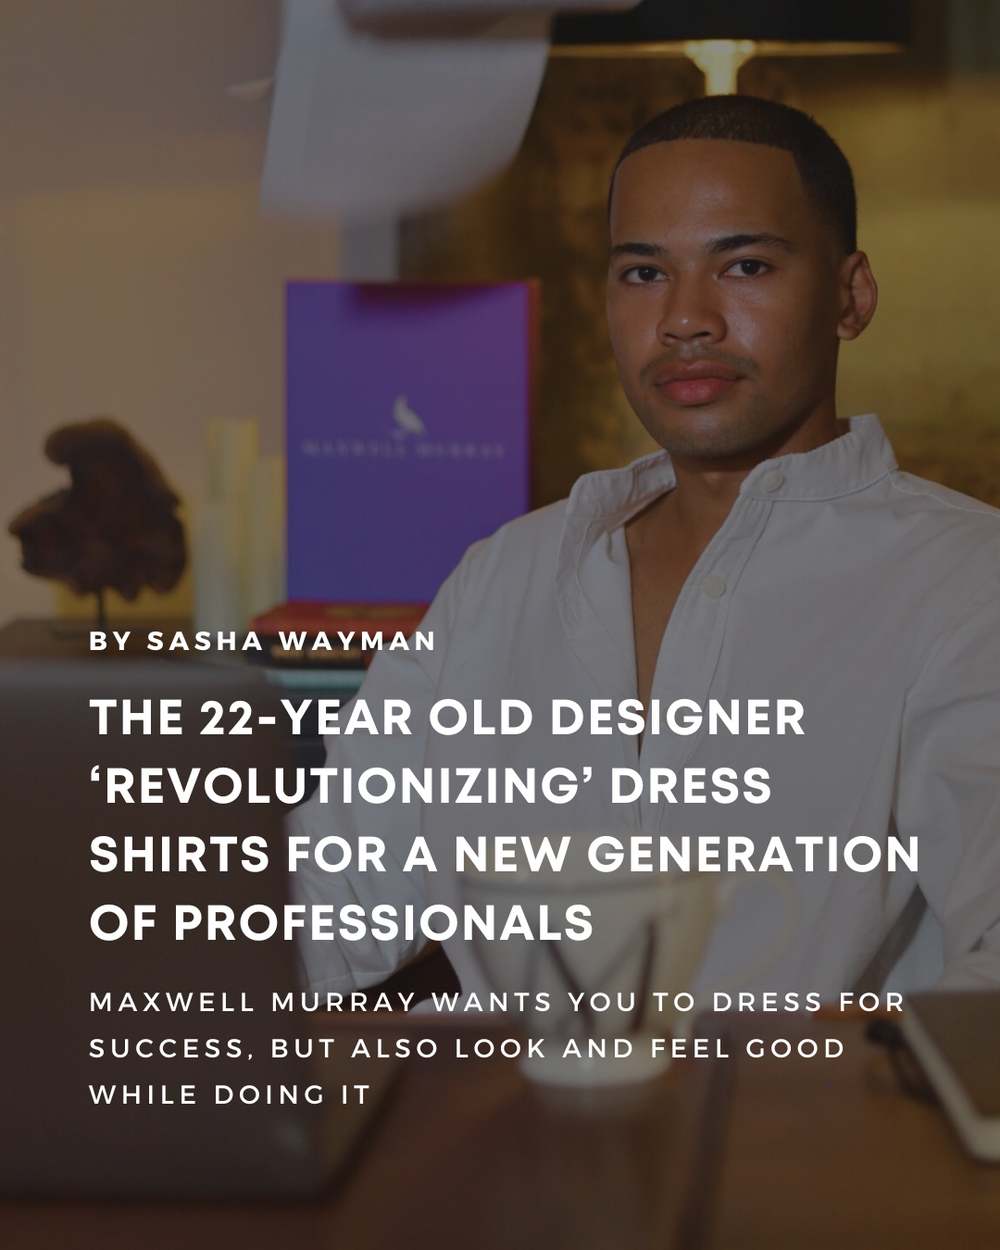 The 22-Year Old Designer ‘Revolutionizing’ Dress Shirts For a New Generation of Professionals